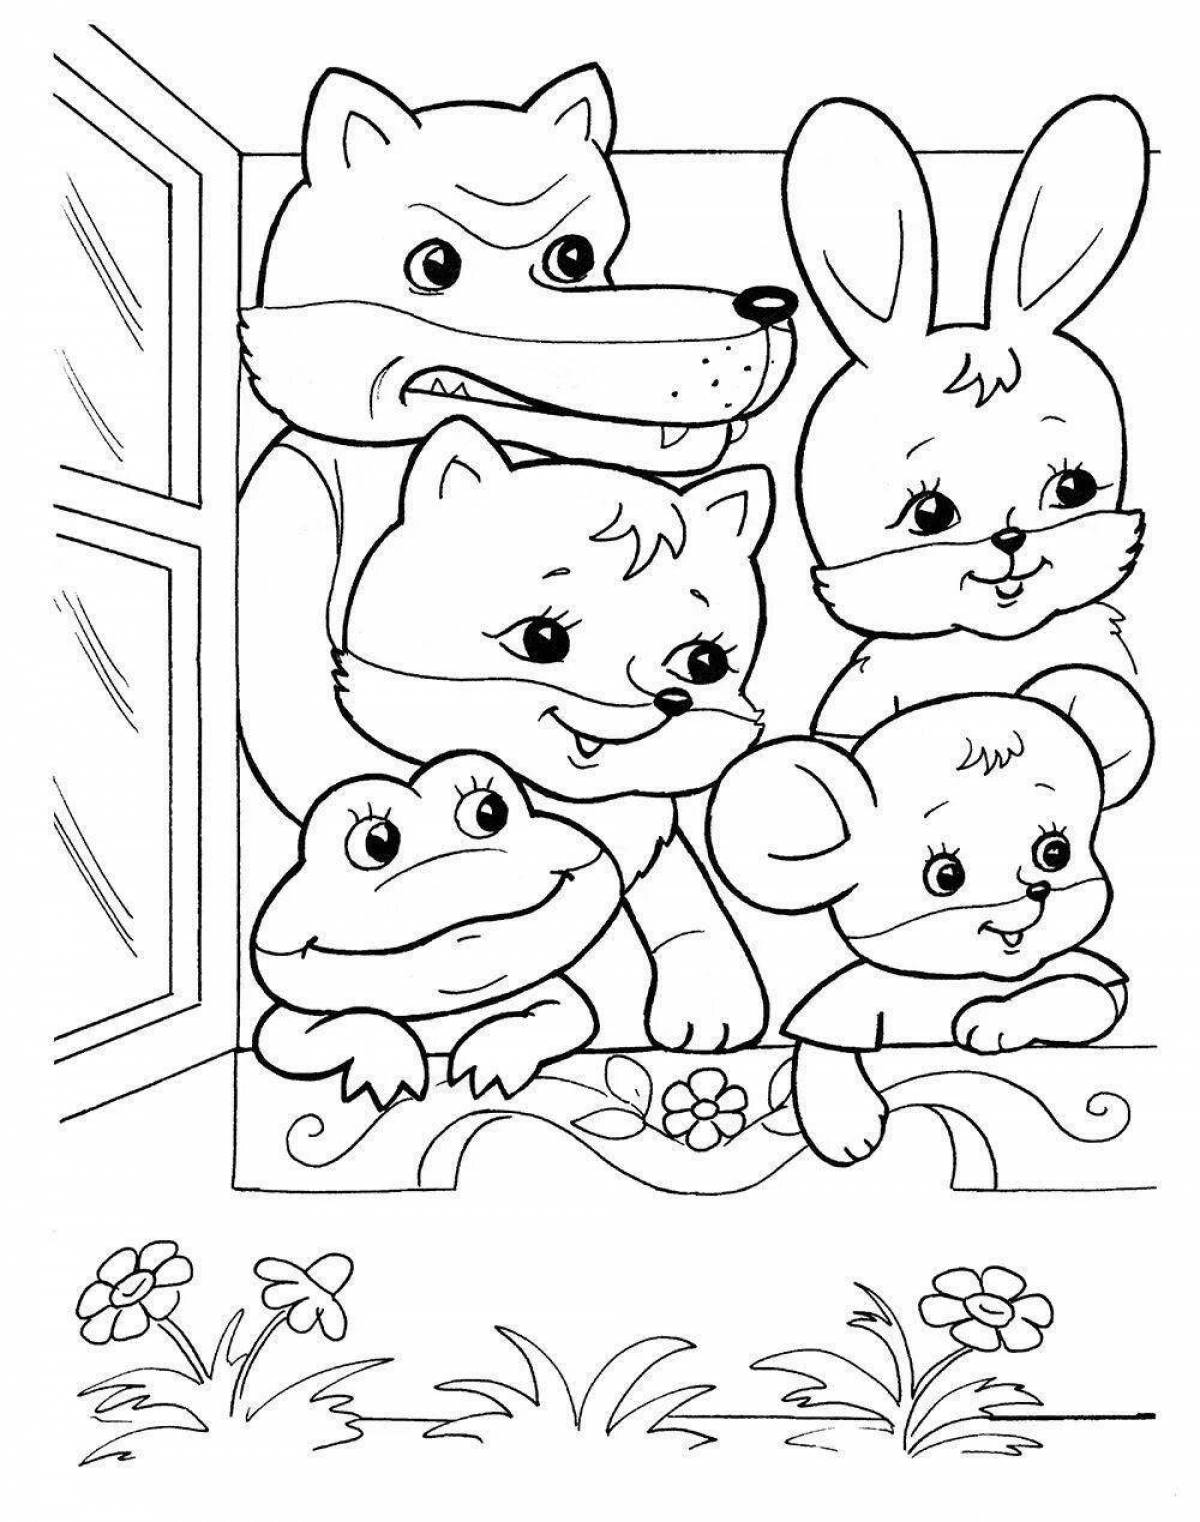 Glorious coloring book visiting a fairy tale 4-5 years old middle group